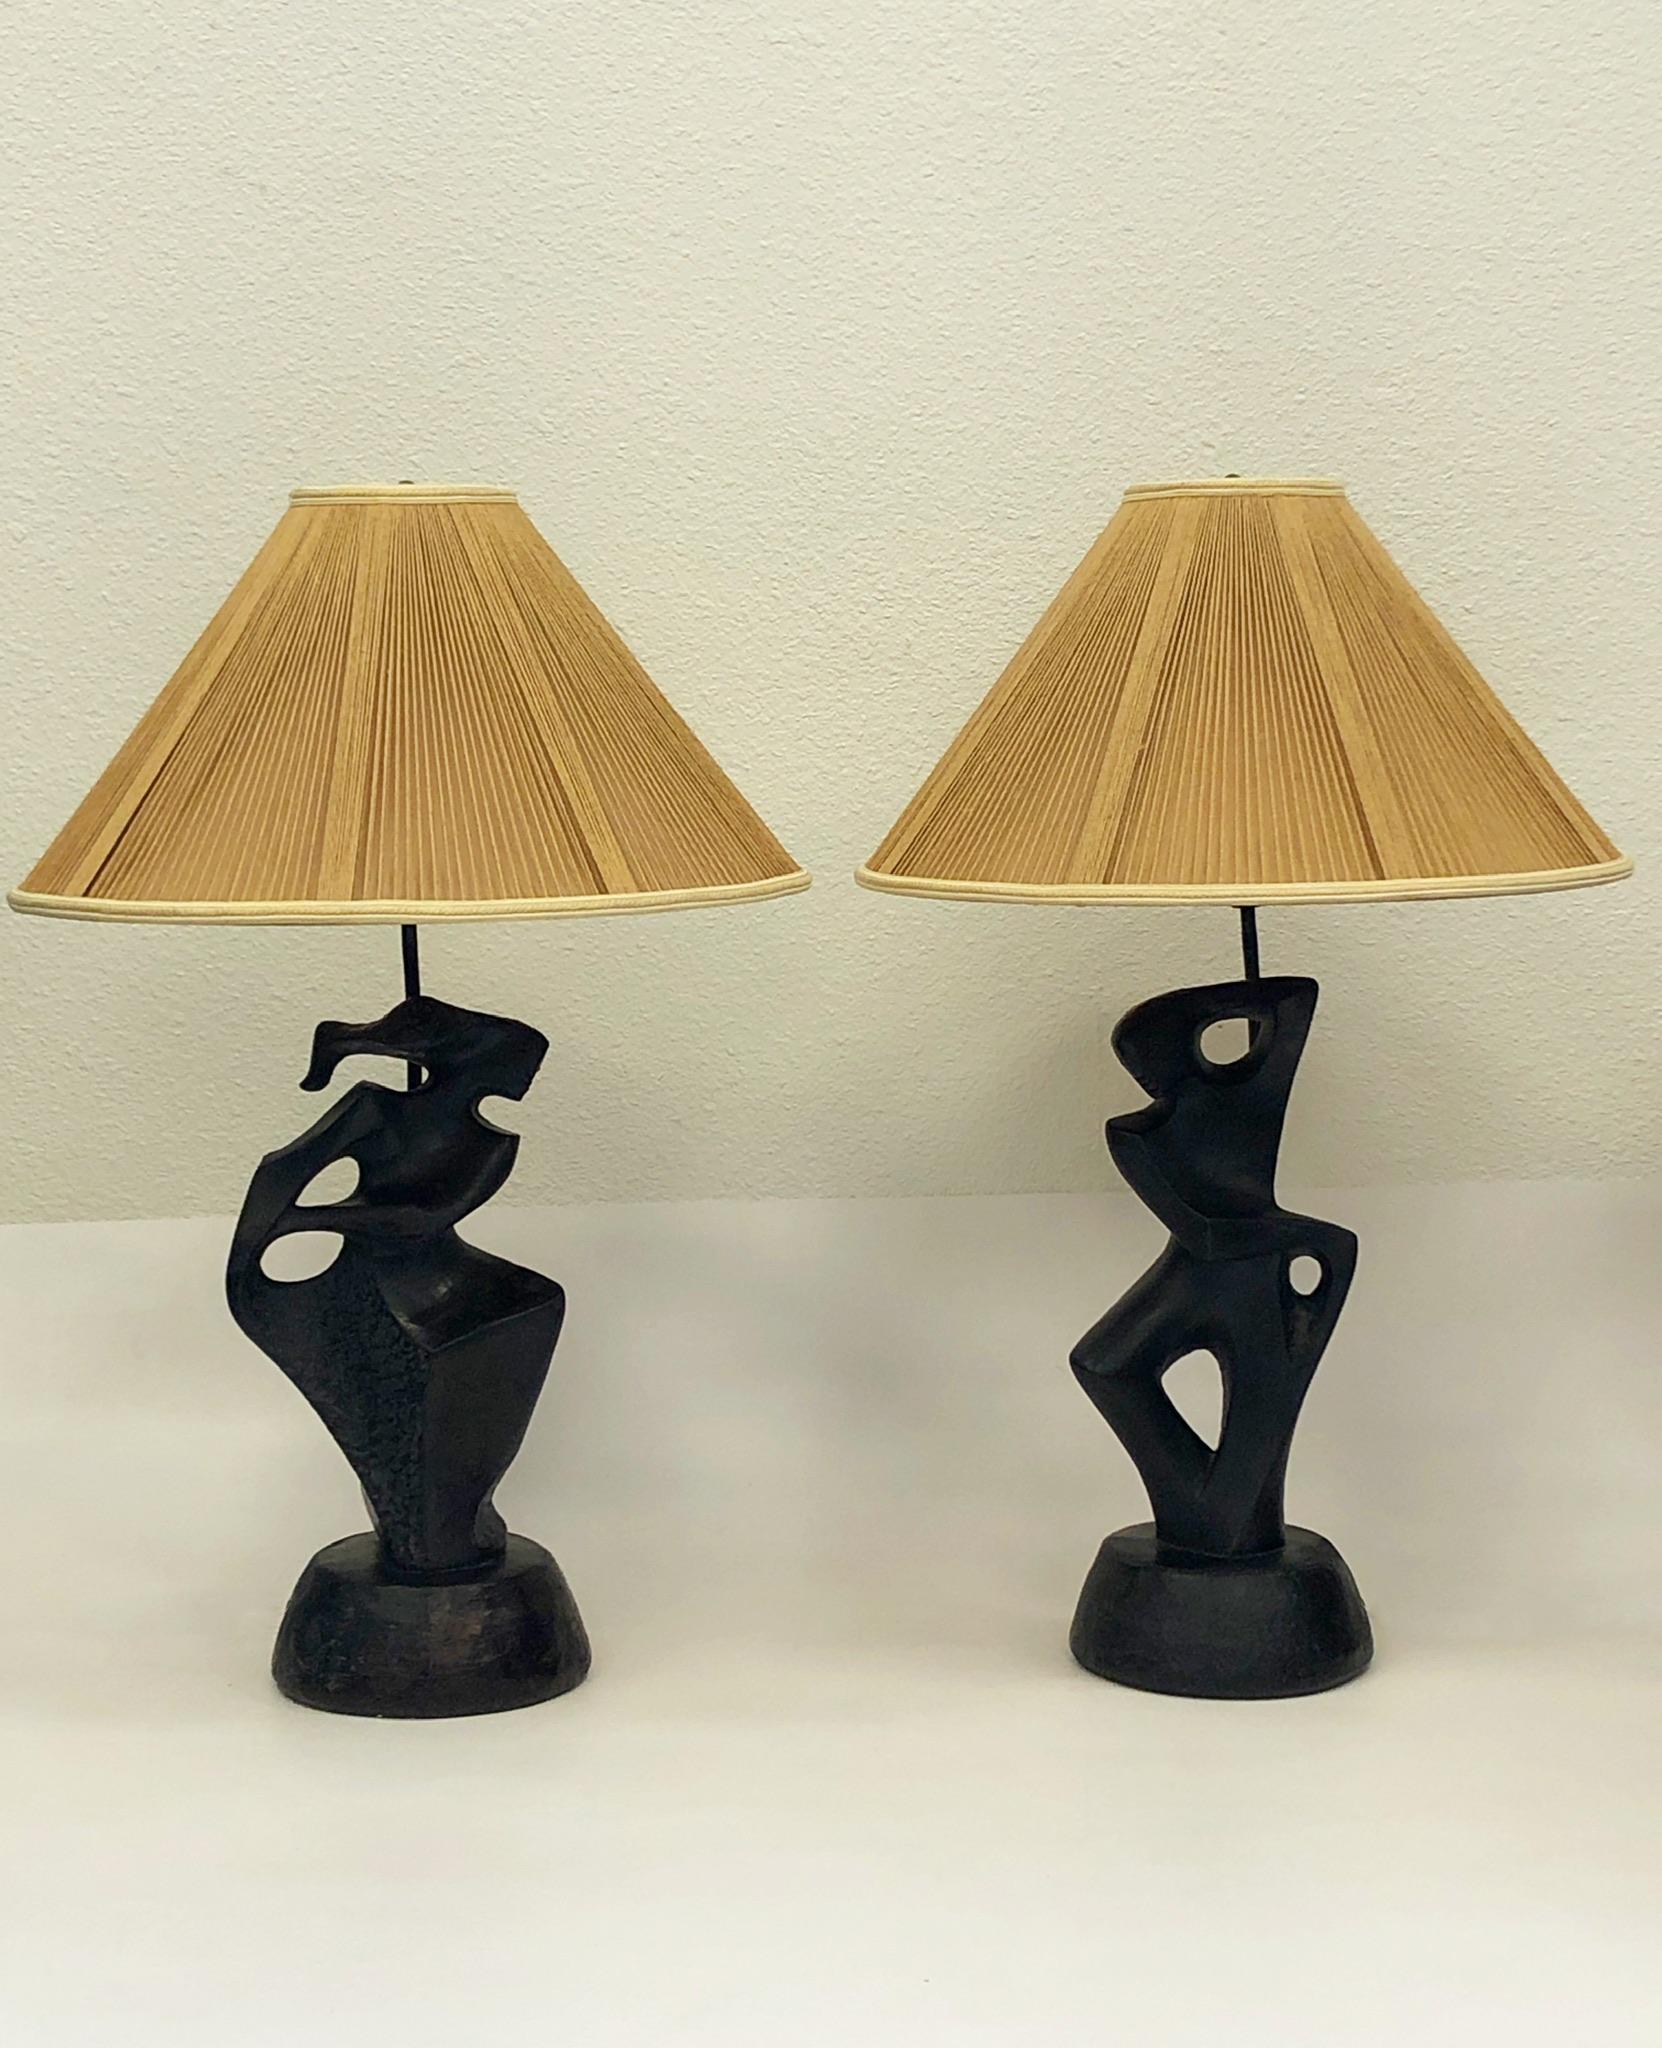 Pair of Black Lacquered Sculptural Table Lamps by Marianna von Allesch for RIMA 3